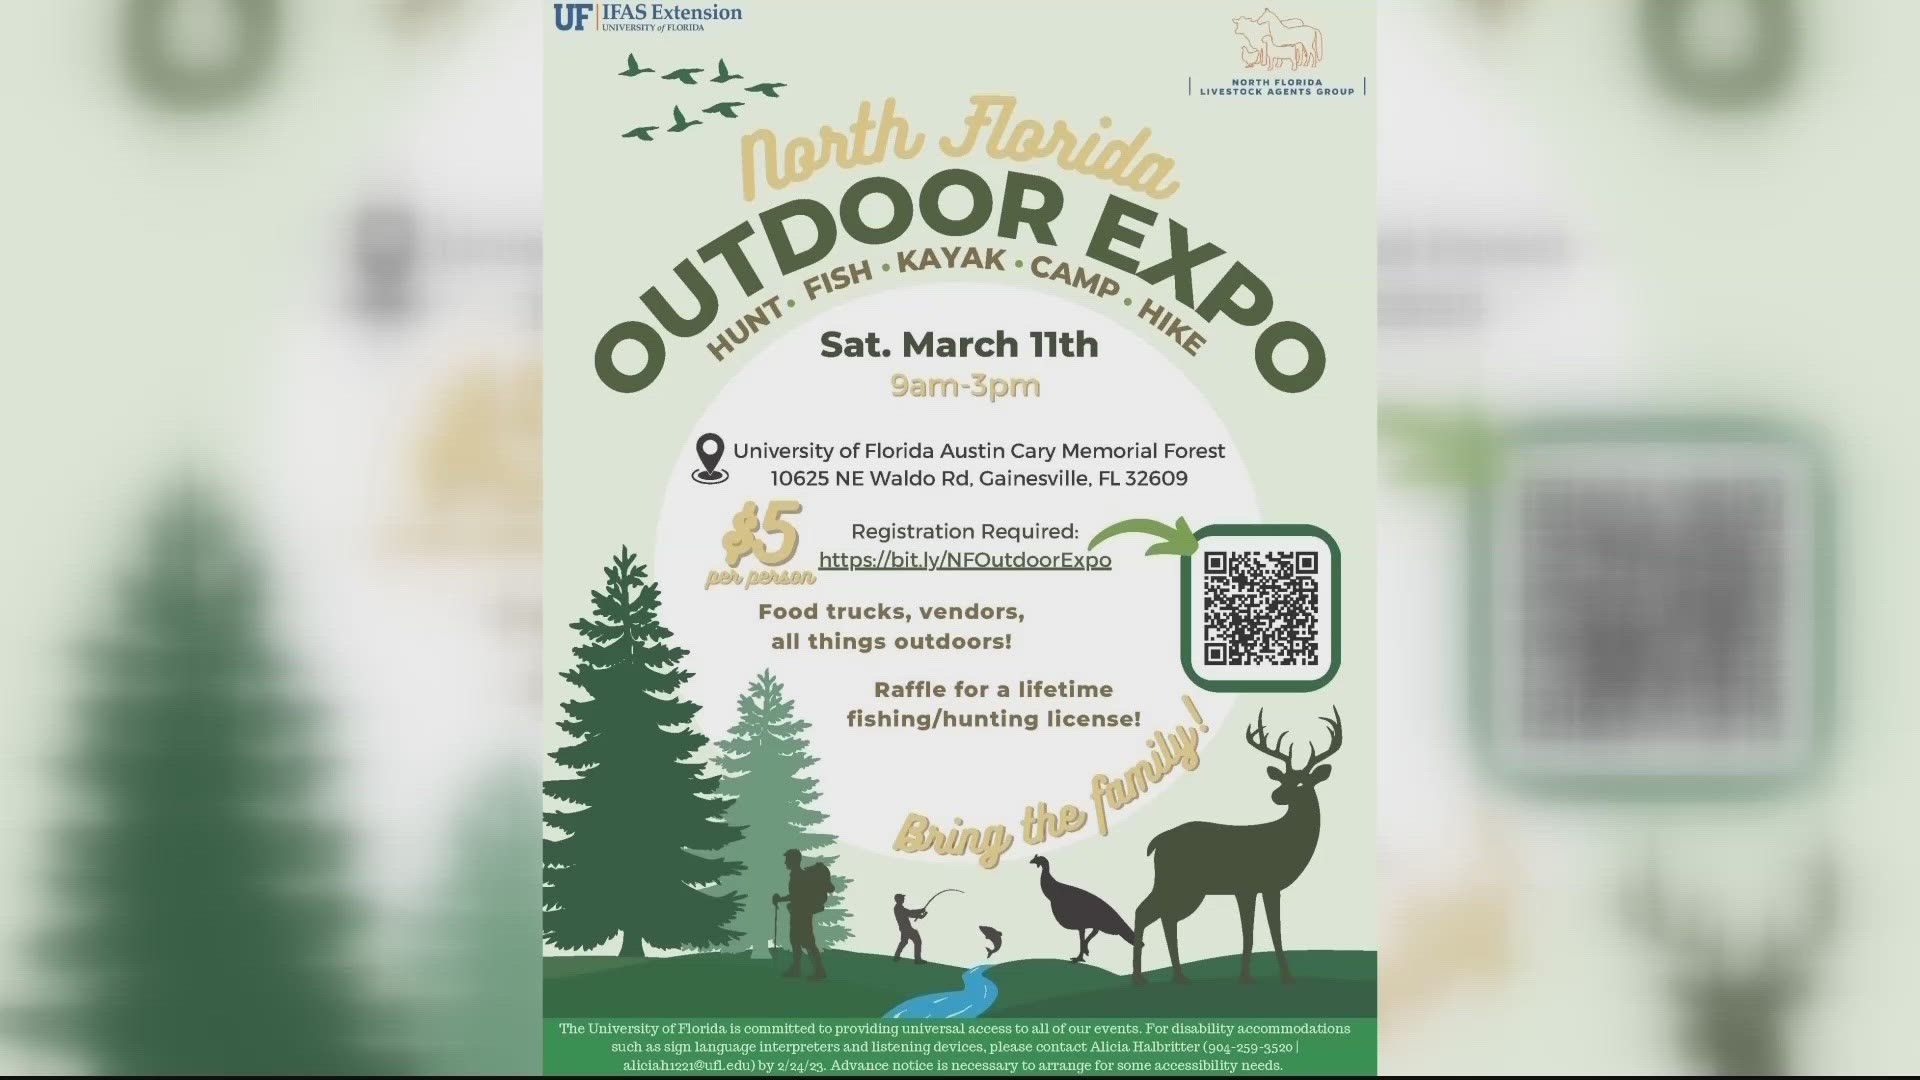 Stephen Jennewein with the UF IFAS Extension Duval County shares all the exciting details on this weekend's North Florida Outdoor Expo.